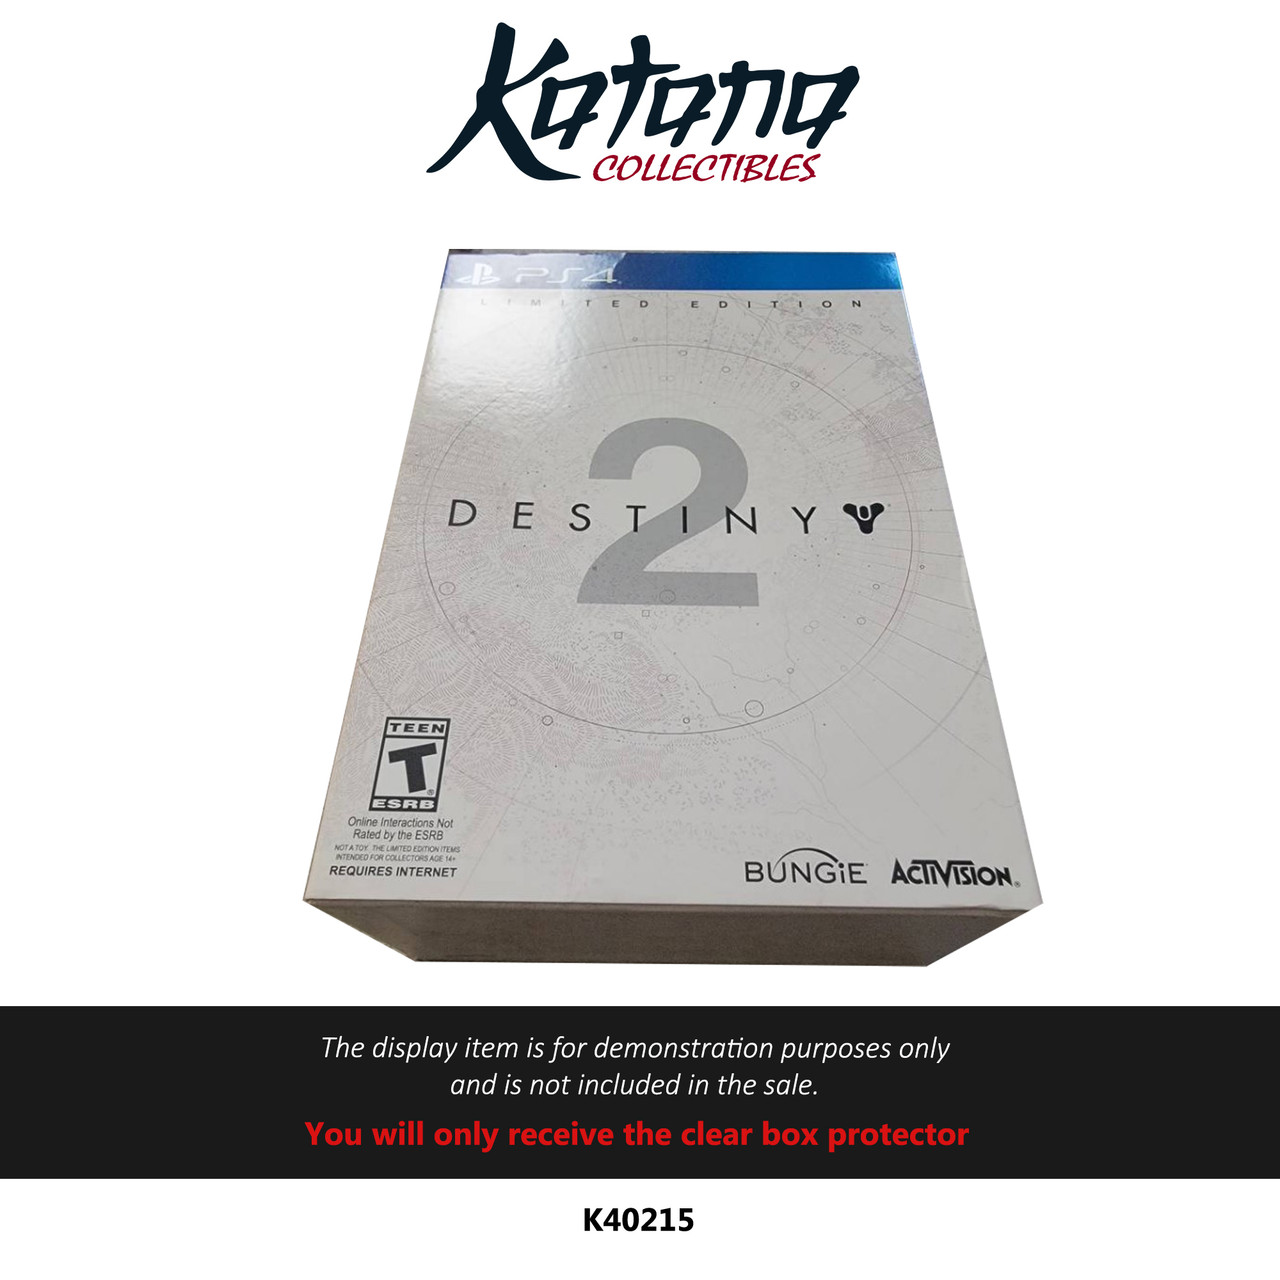 Katana Collectibles Protector For Destiny 2 Limited Edition PS4